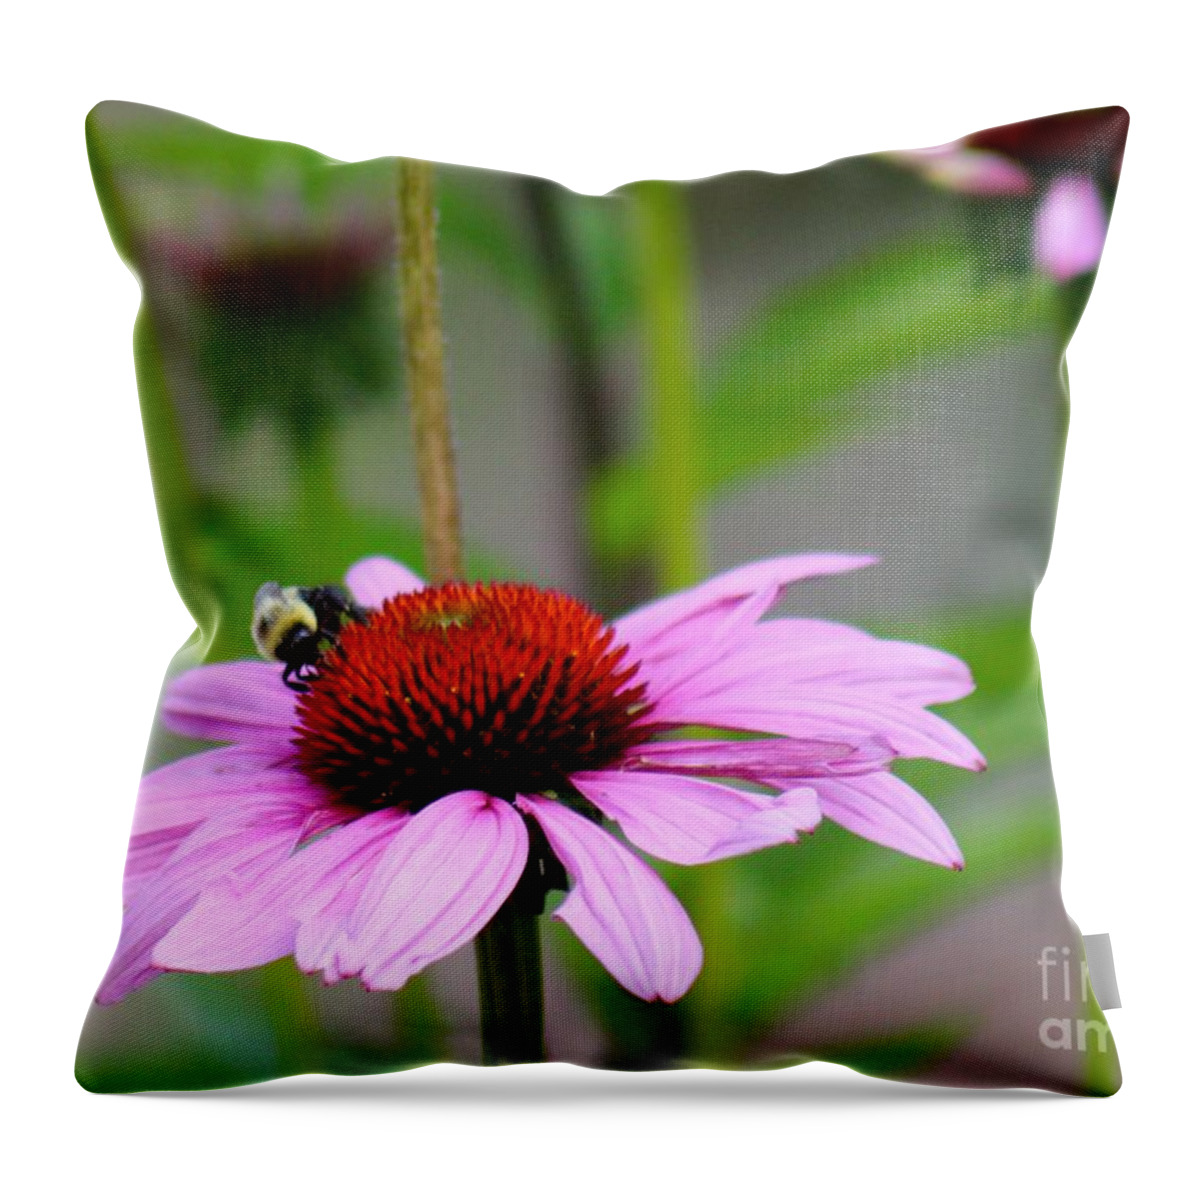 Pink Throw Pillow featuring the photograph Nature's Beauty 90 by Deena Withycombe